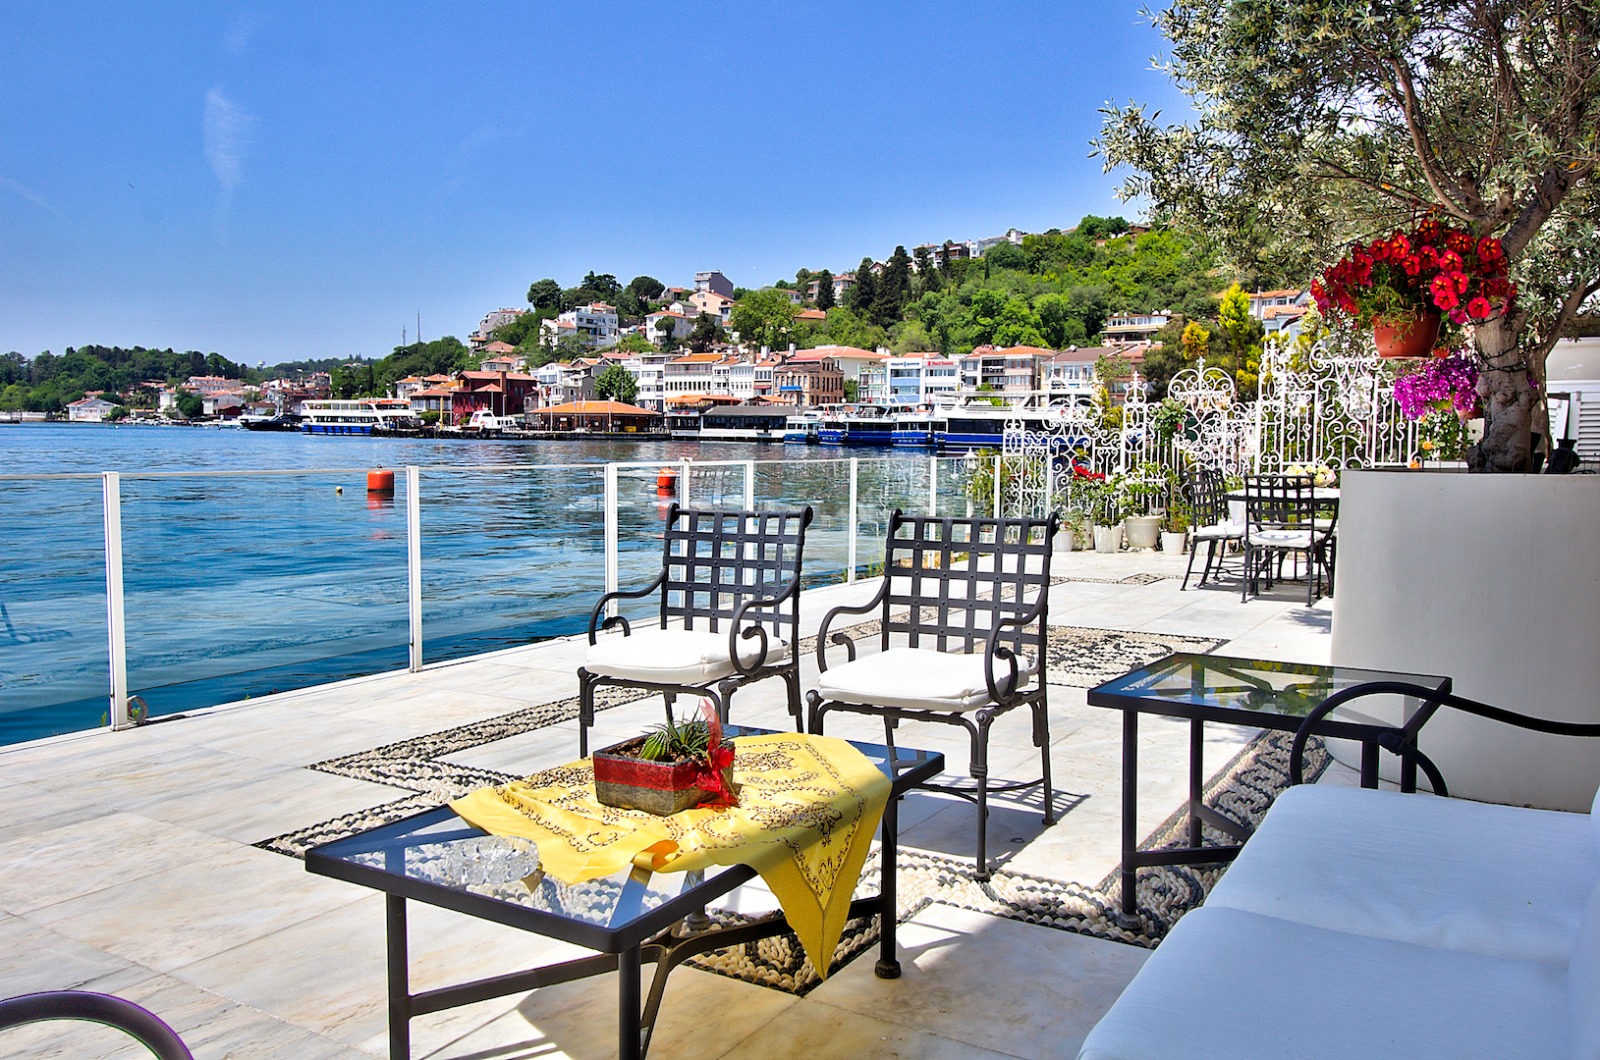 A porch with fancy chairs and flowers right next to the water with a town in the background.